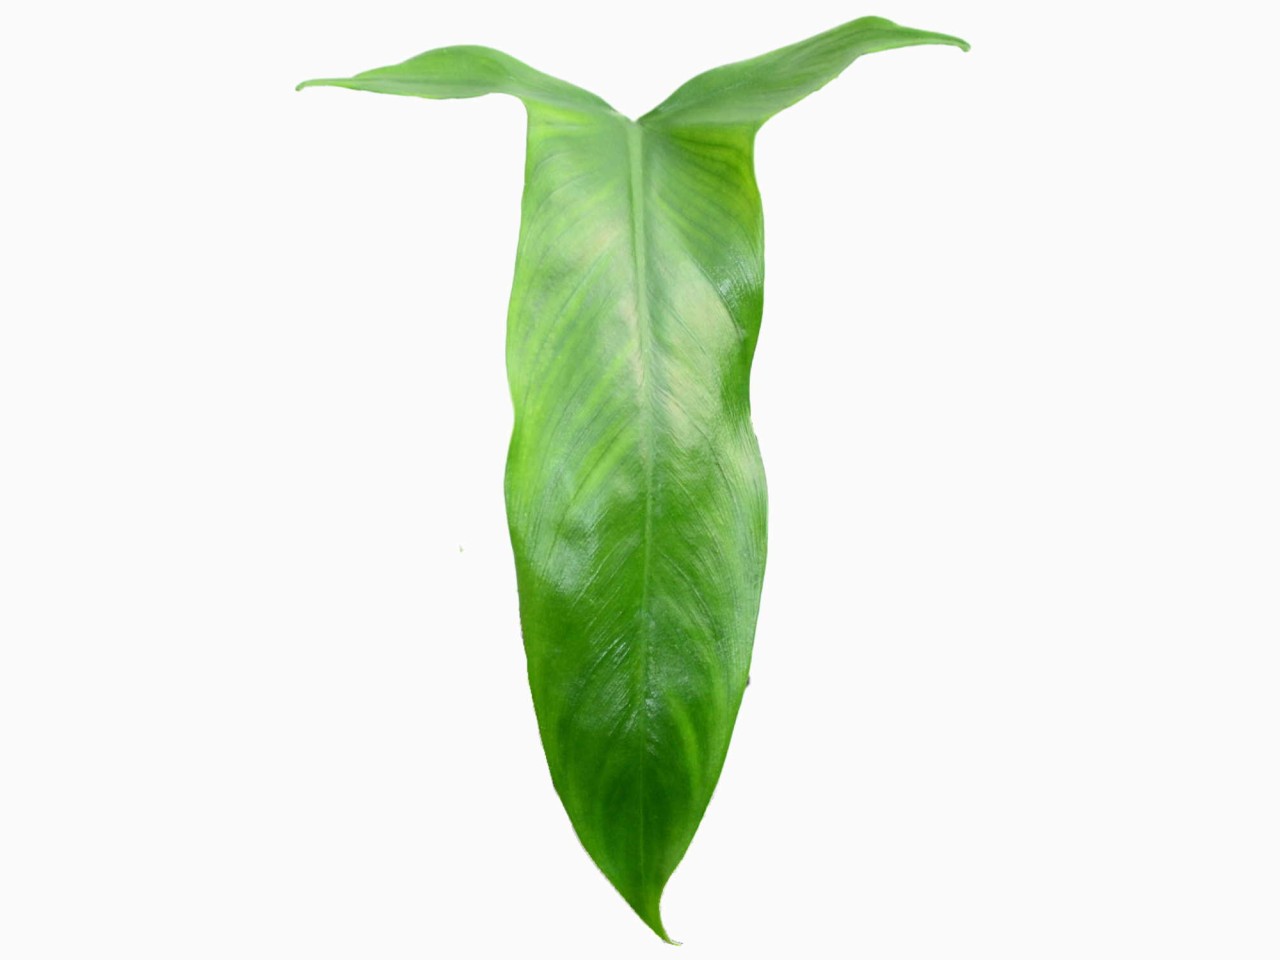 Philodendron micranthum